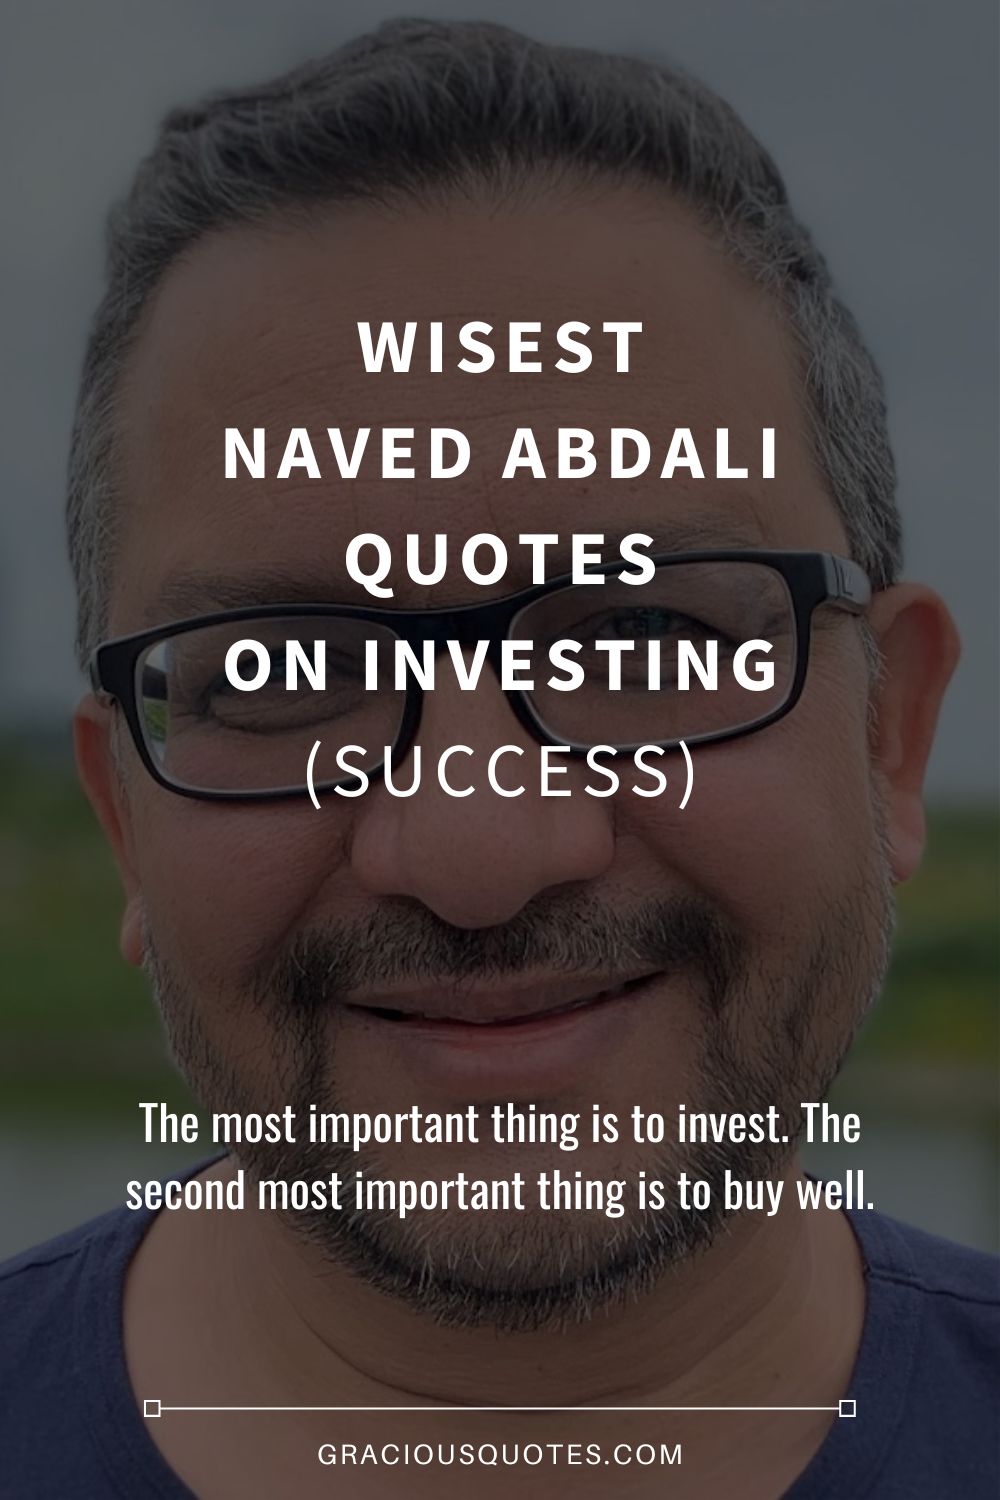 Wisest Naved Abdali Quotes on Investing (SUCCESS) - Gracious Quotes